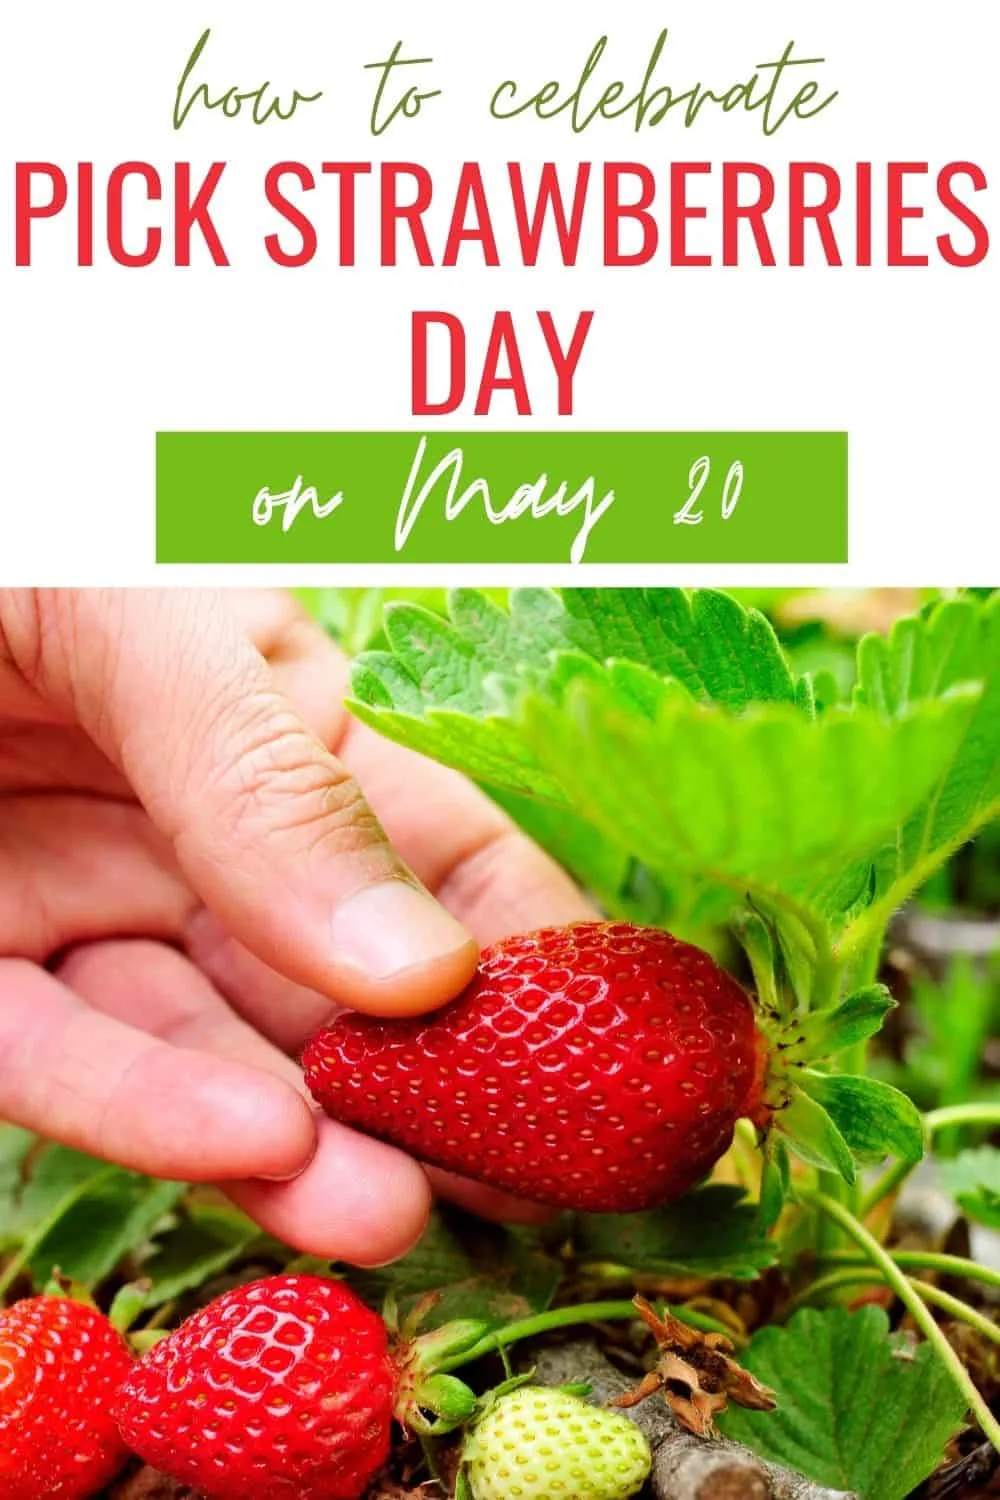 How to celebrate pick strawberries day on May 20